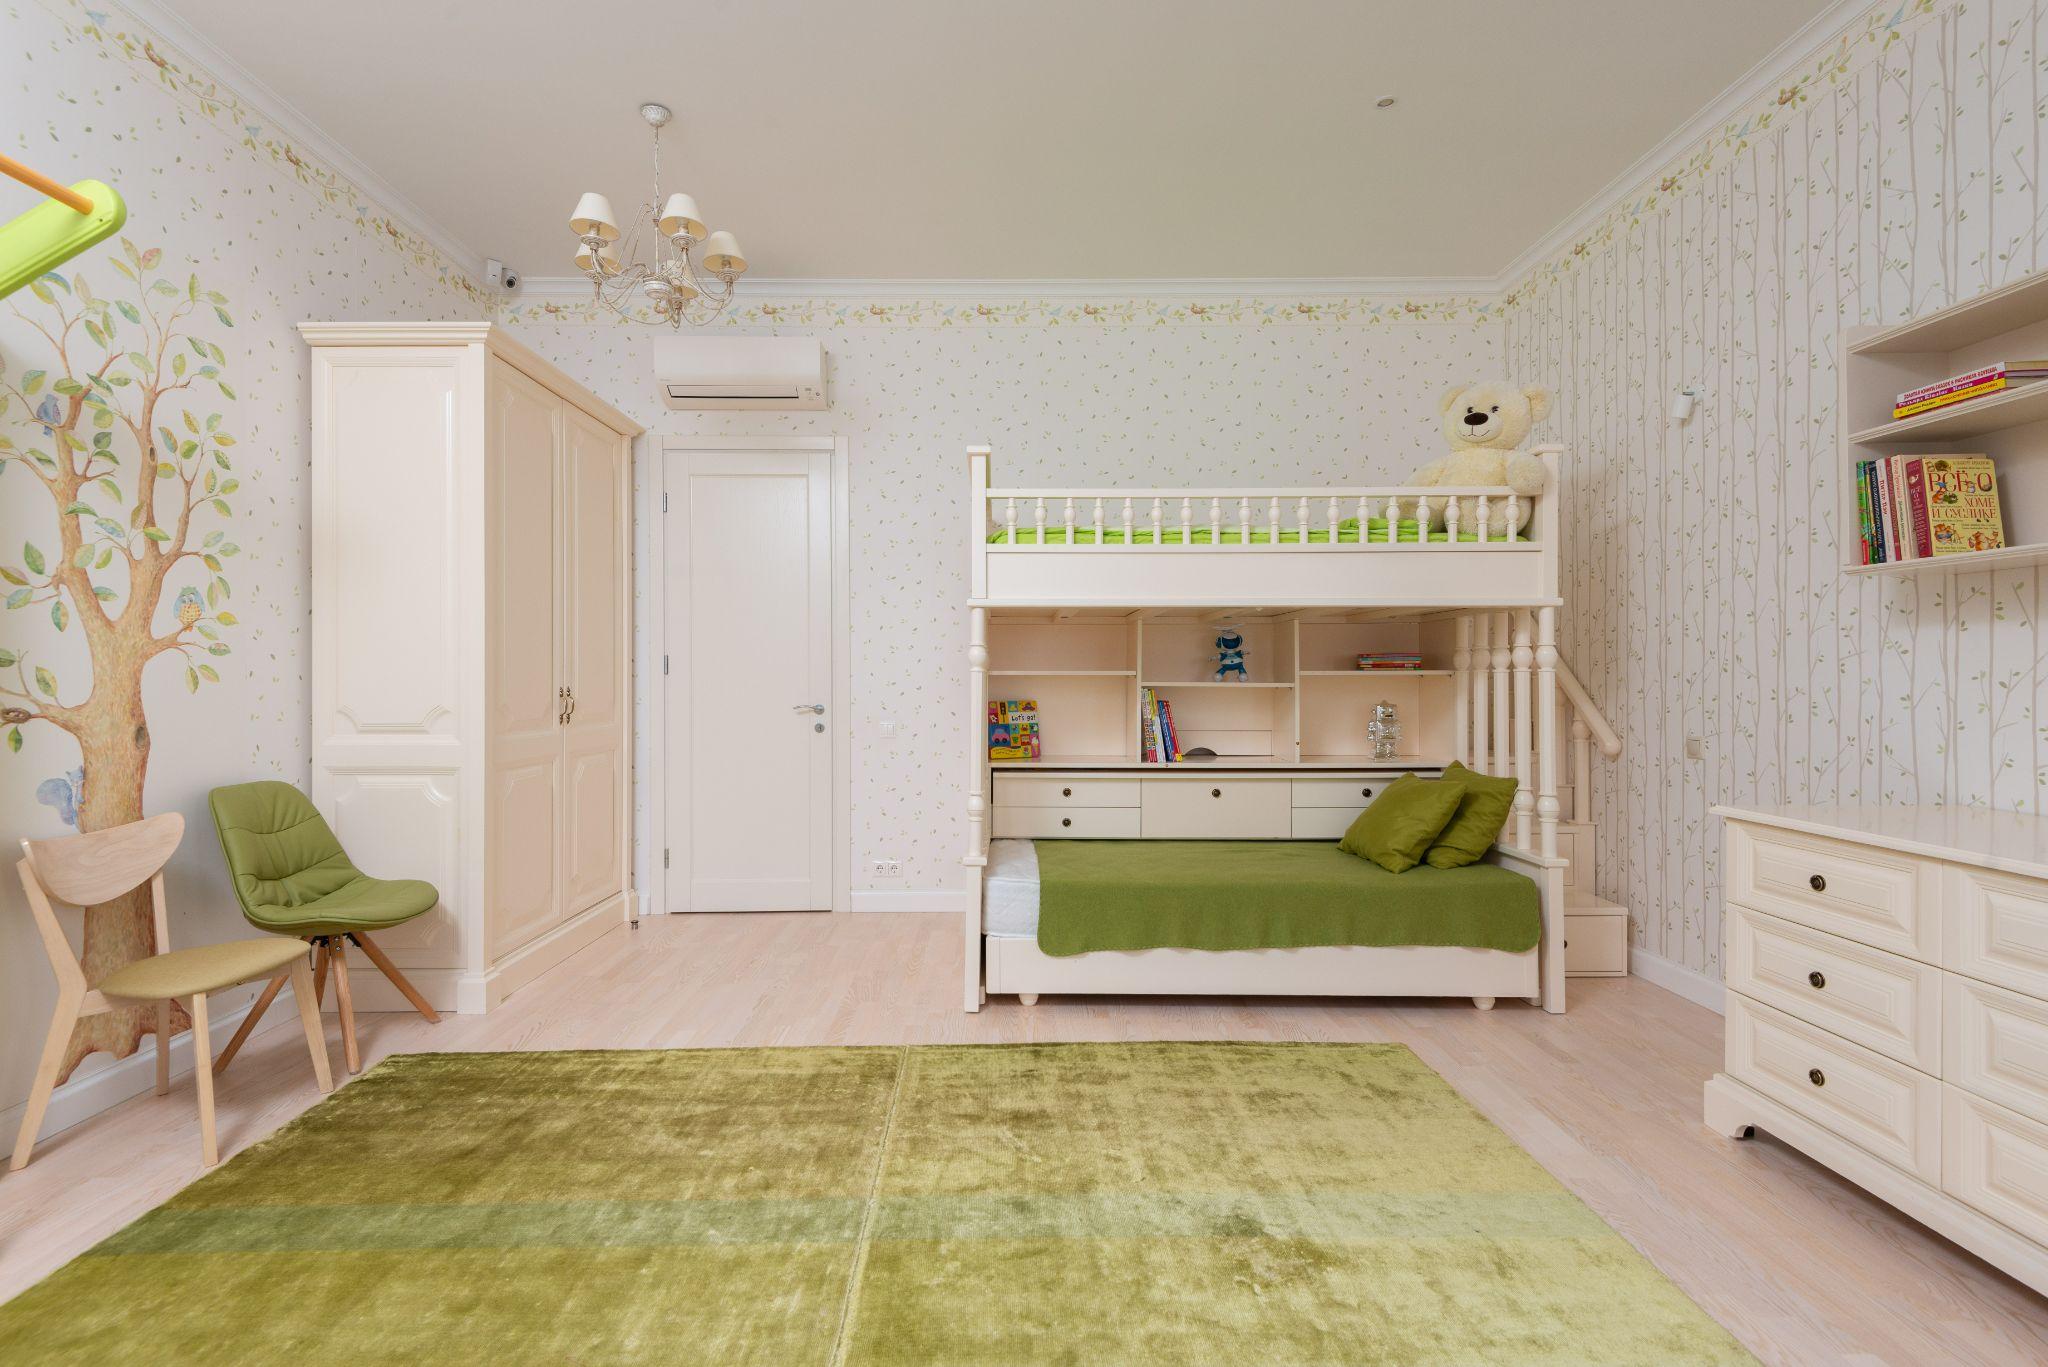 Vibrant colored room - Toddler Boy Room Ideas - Baby Journey